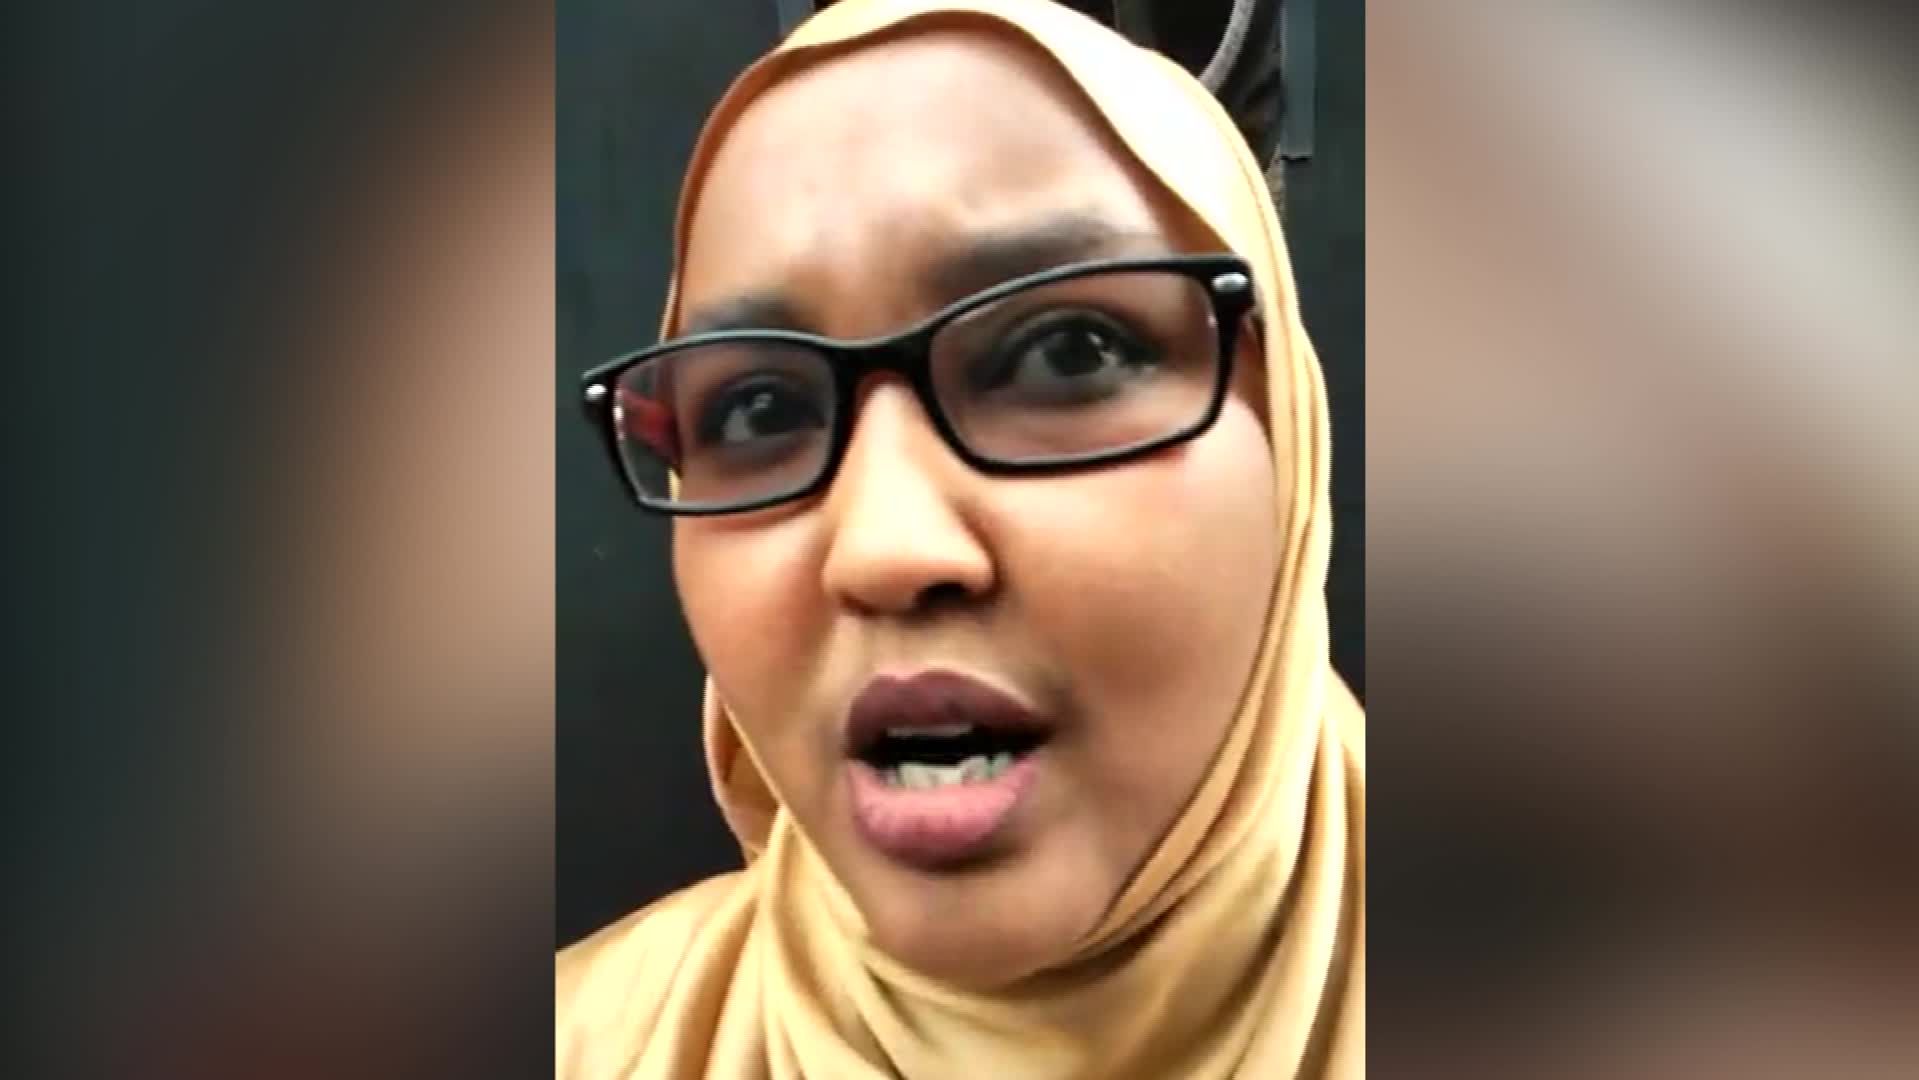 A short clip circulating on social media showing Kenyan MP Fatuma Gedi speaking after allegedly being assaulted by fellow MP Rashid Kassim. In the clip, she claims that he called her stupid and struck her twice. CNN has reached out to MP Kassim but have not gotten a response back.